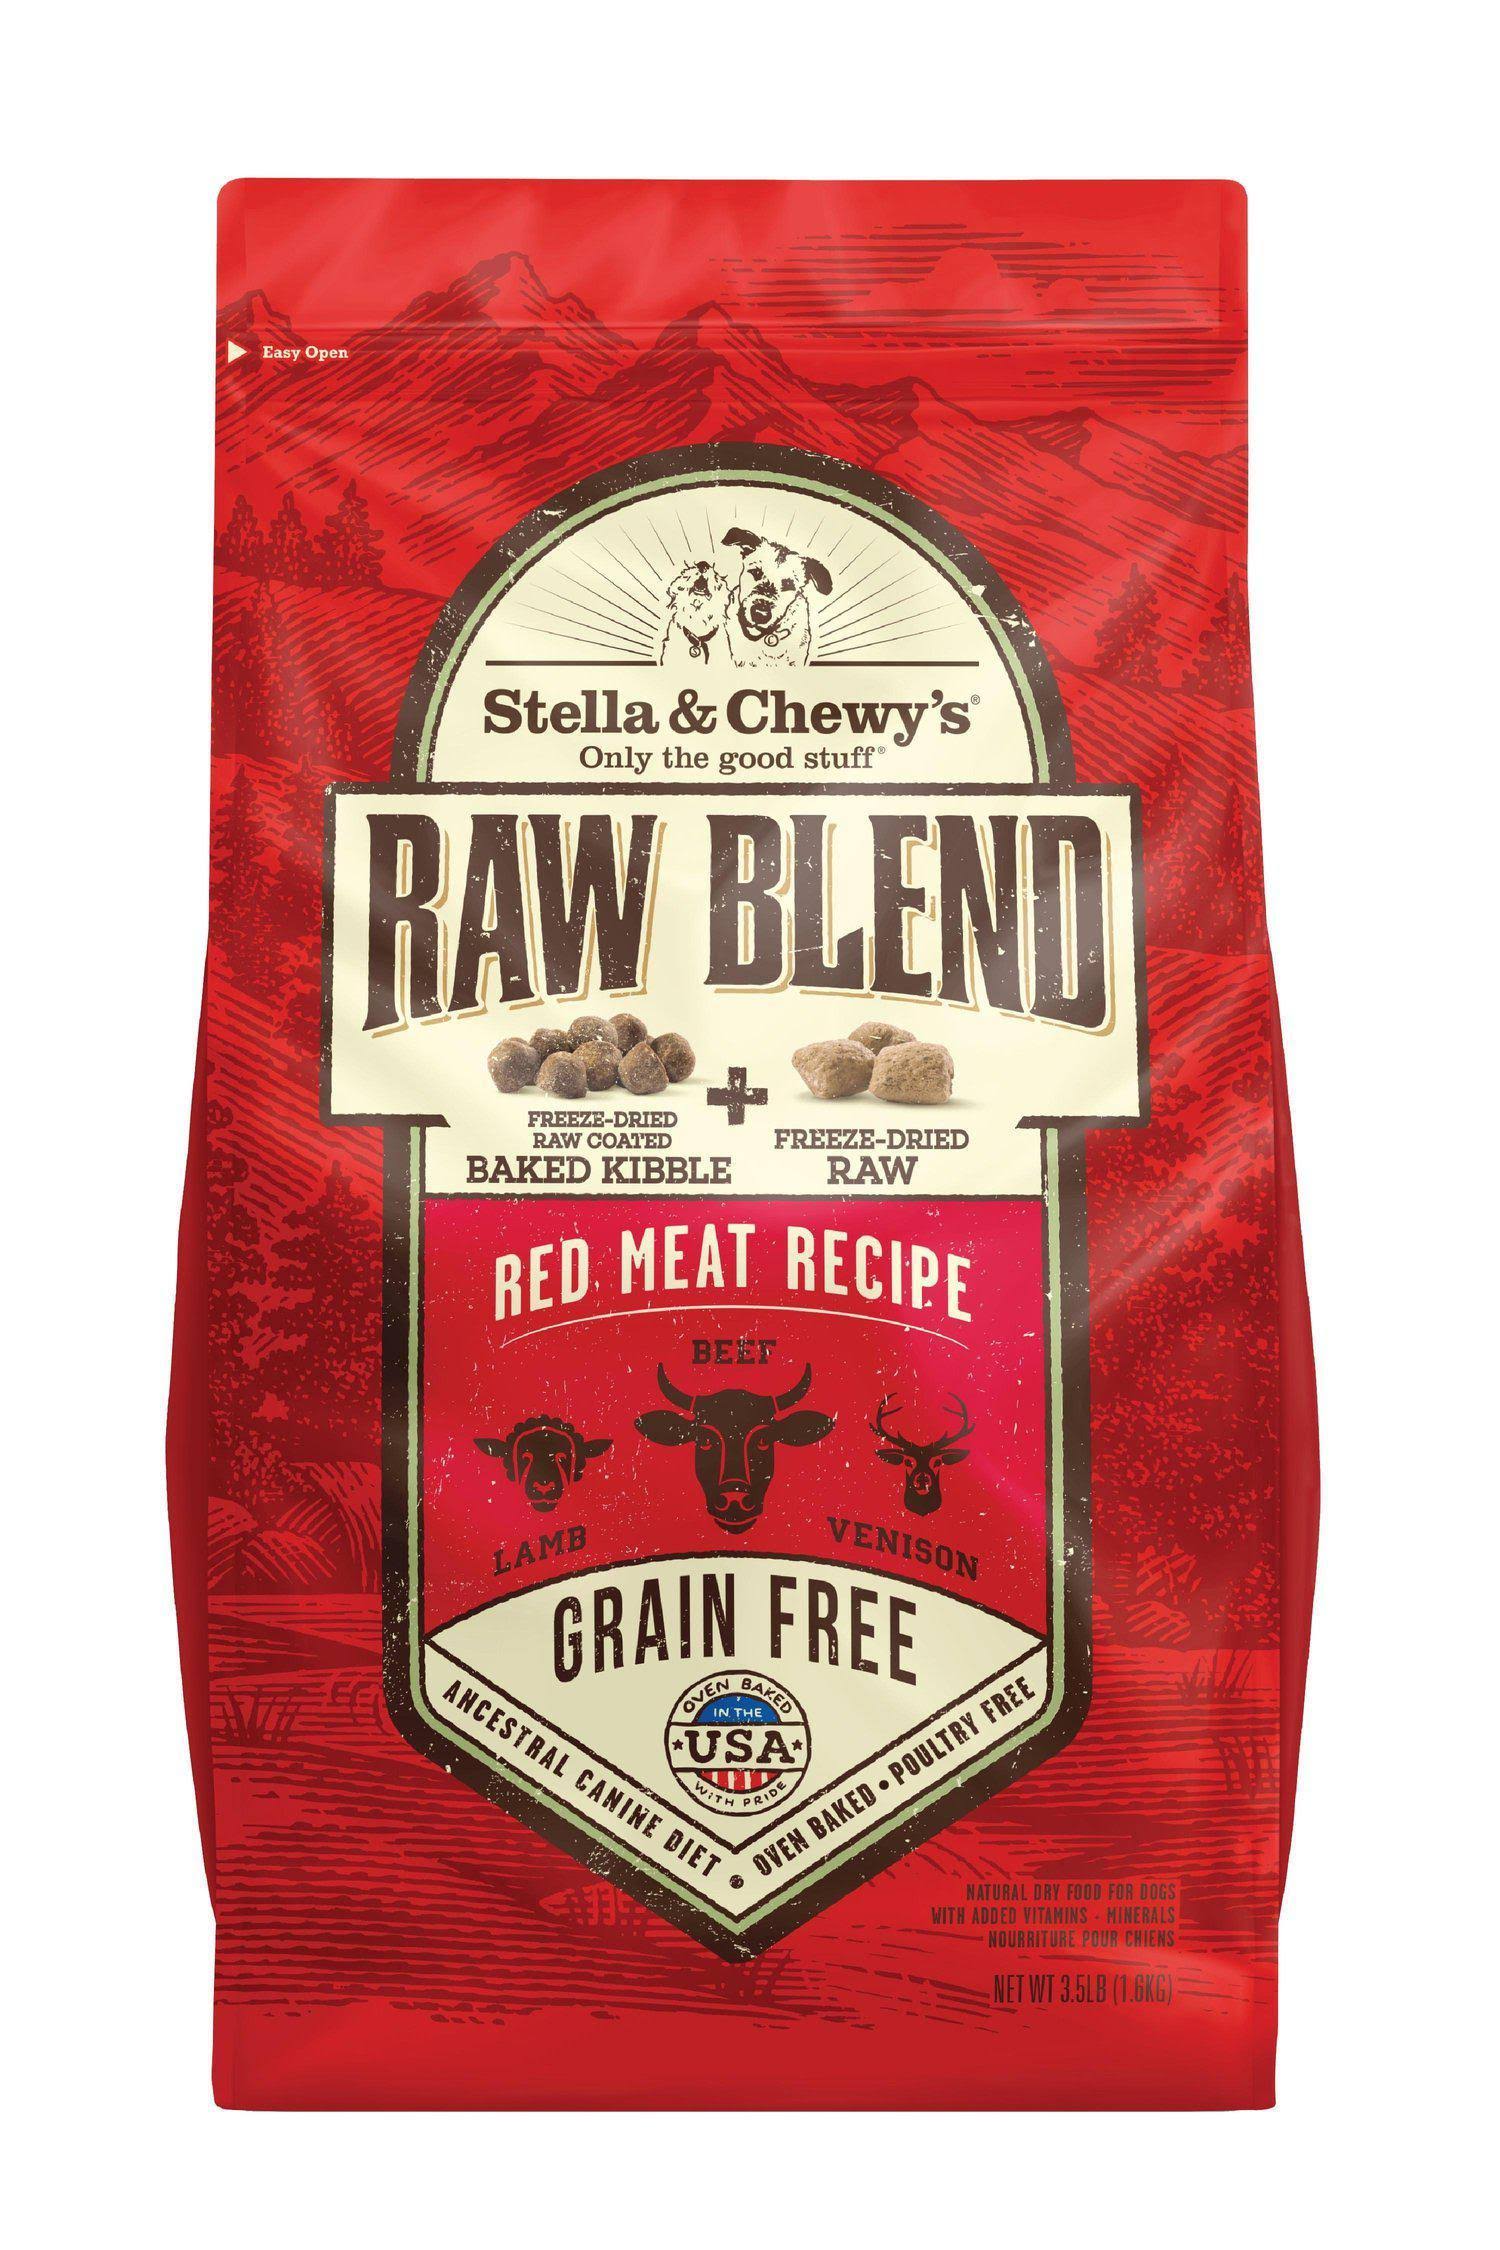 Stella & Chewy's Raw Blend Dog Food - Red Meat Recipe